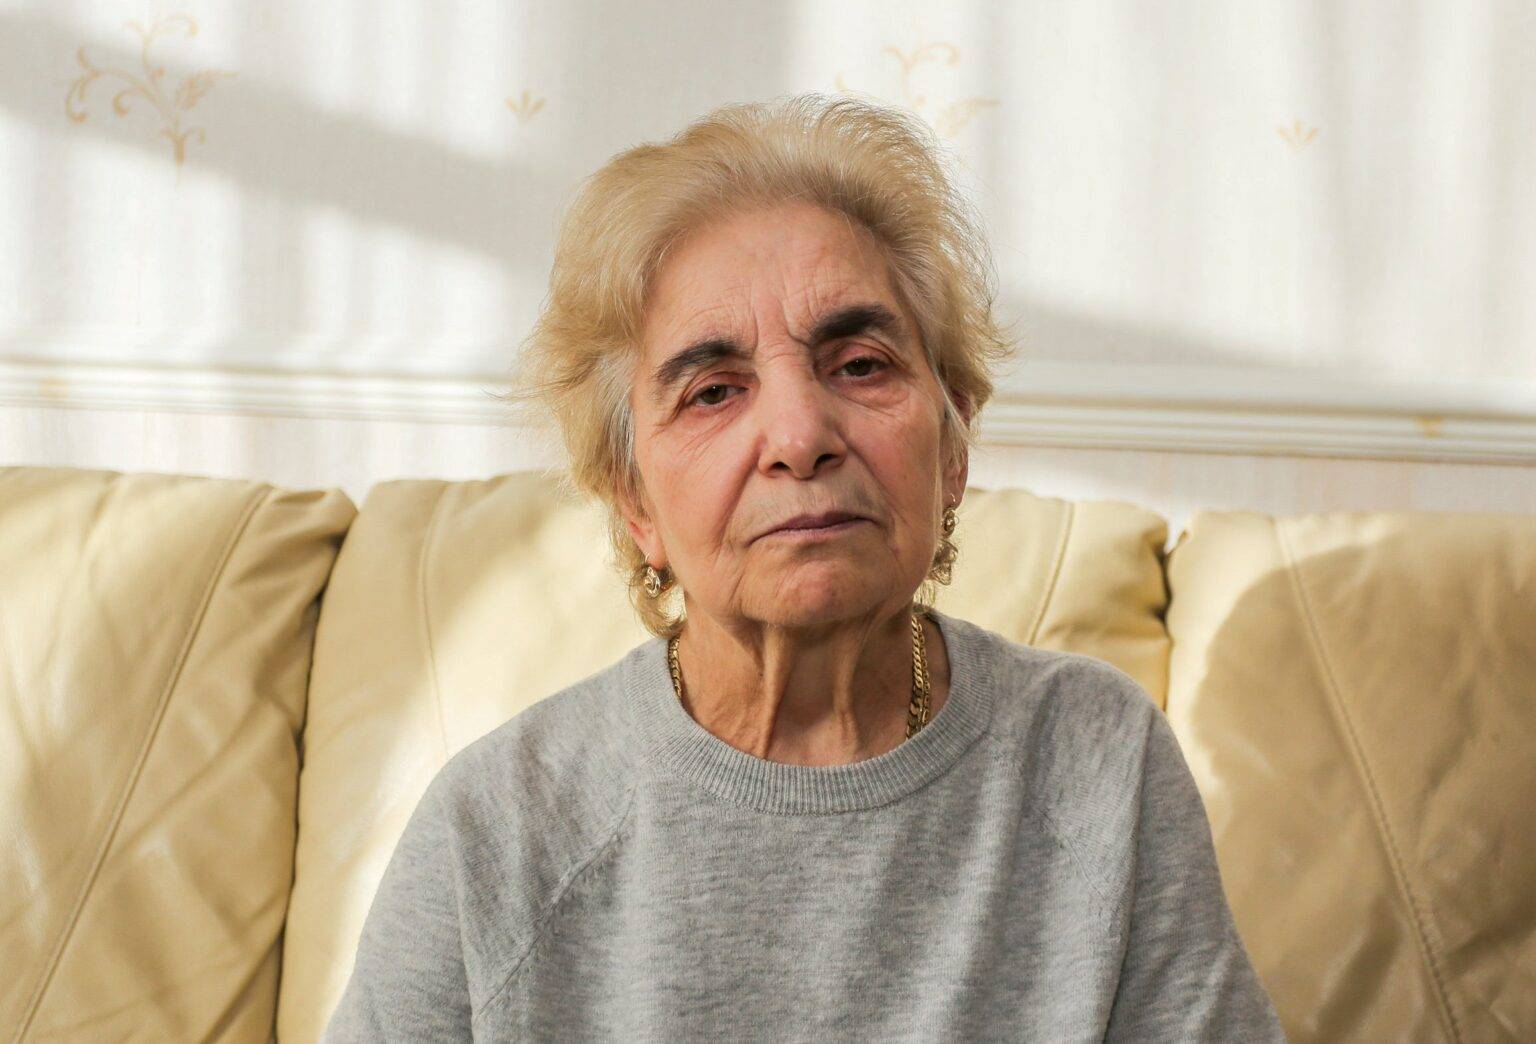 Gran facing deportation after 42 years can stay after Home Office U-turn